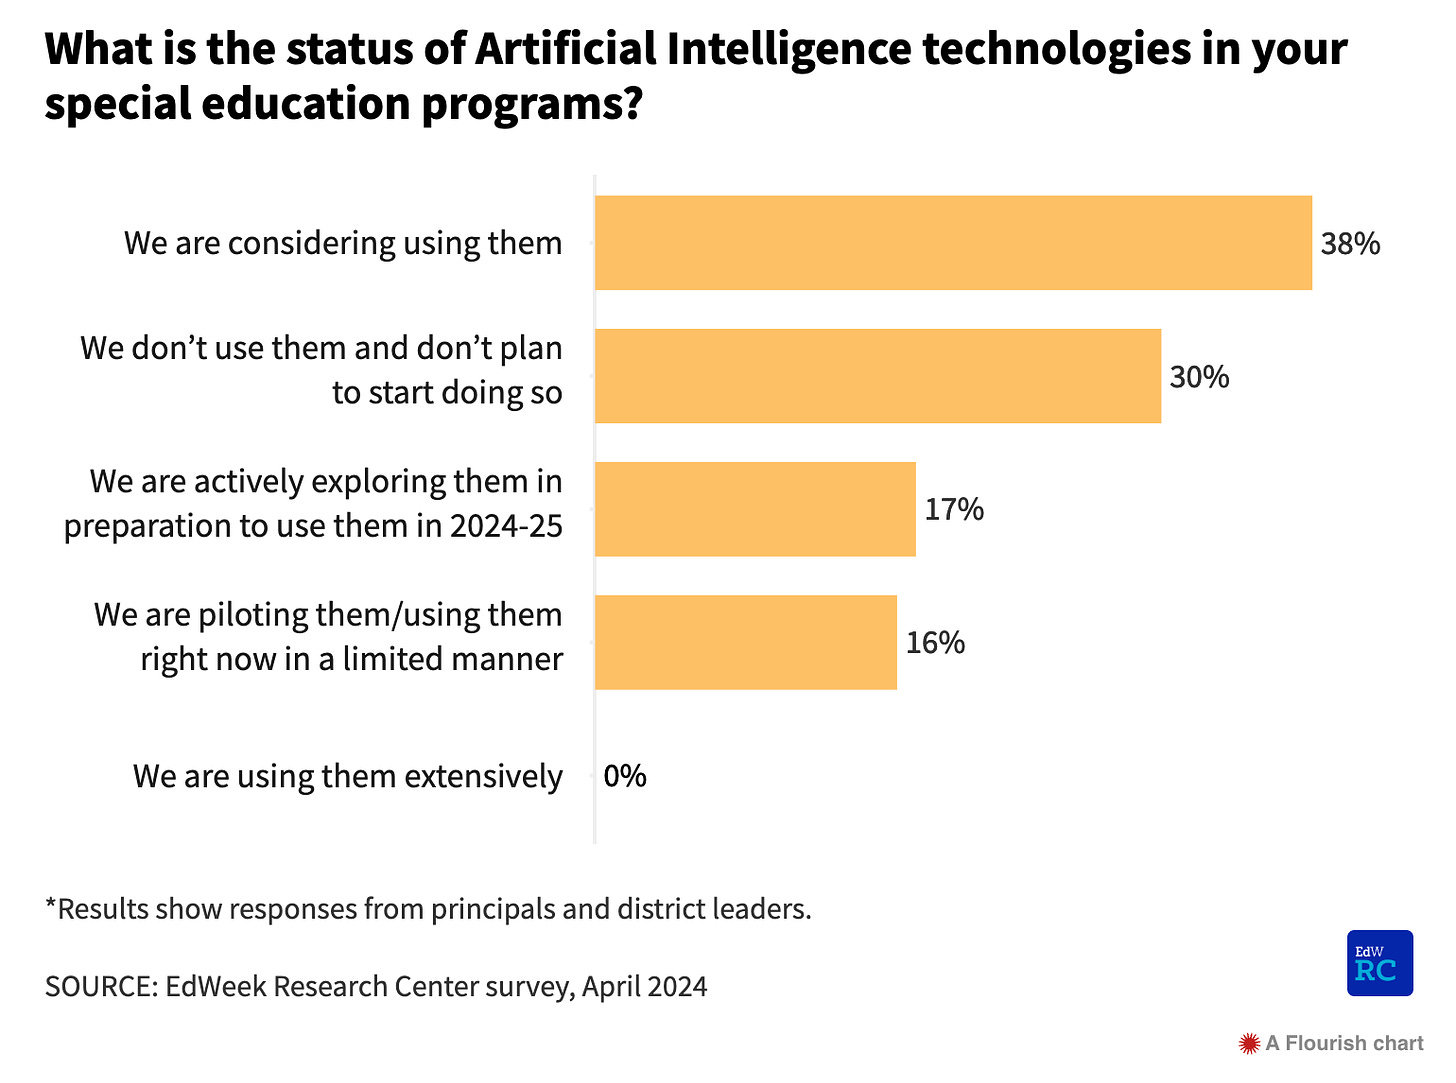 A survey of district principals and district leaders re the state of artificial intelligence in their schools. 0% of them report using it extensively though others report some usage.